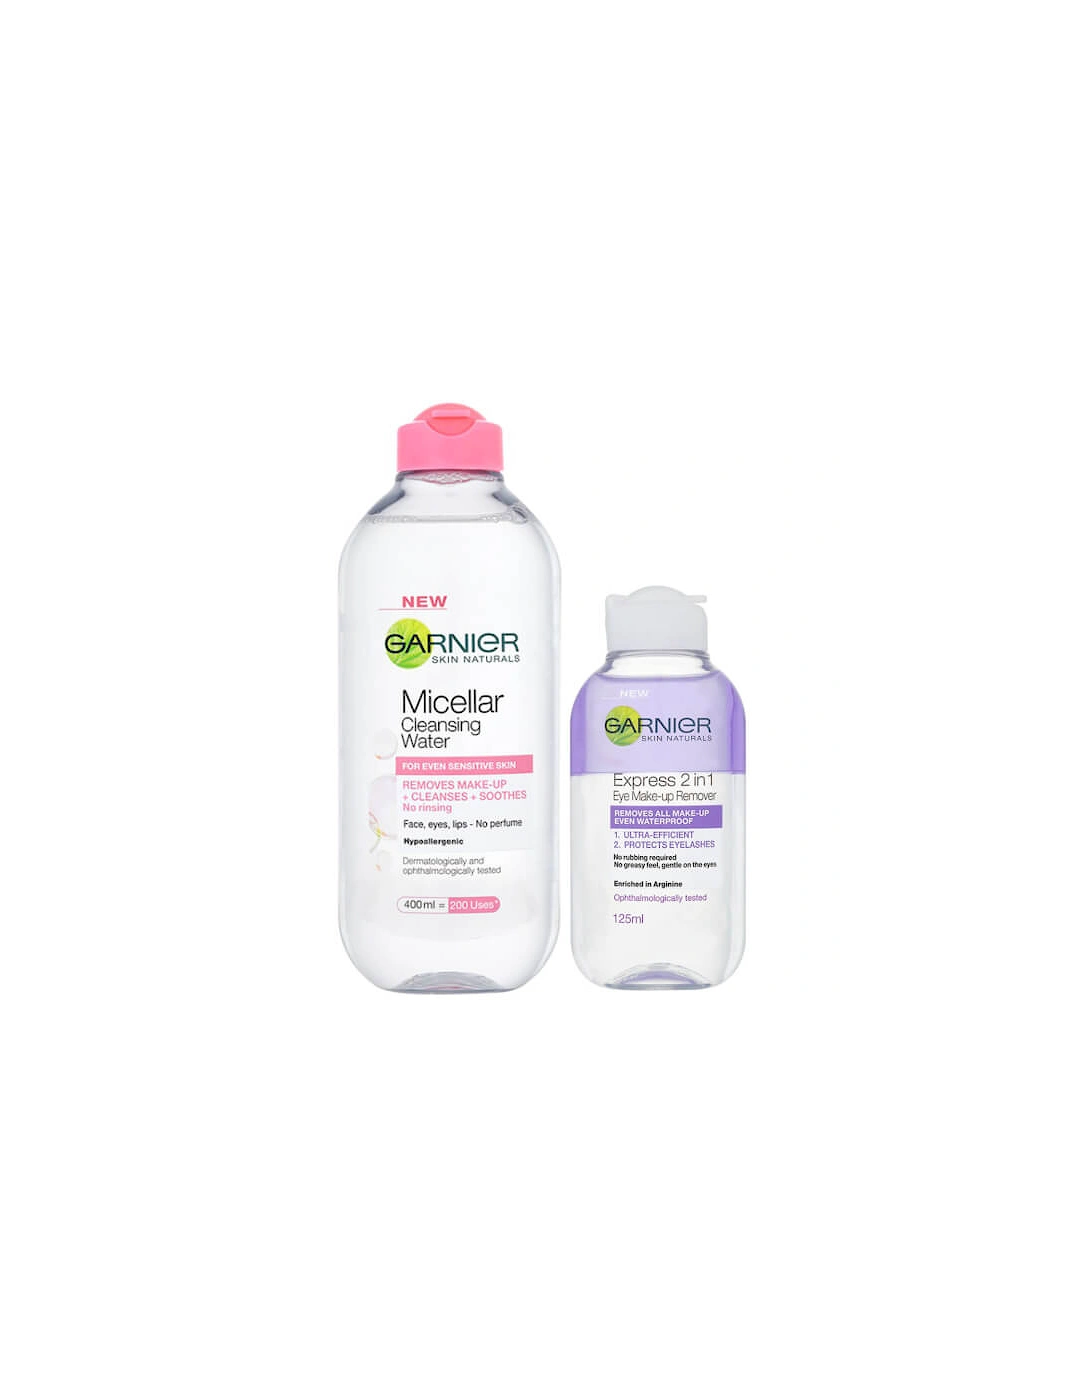 Micellar Water and Makeup Remover for Sensitive Skin Kit Exclusive (Worth £9.48), 2 of 1